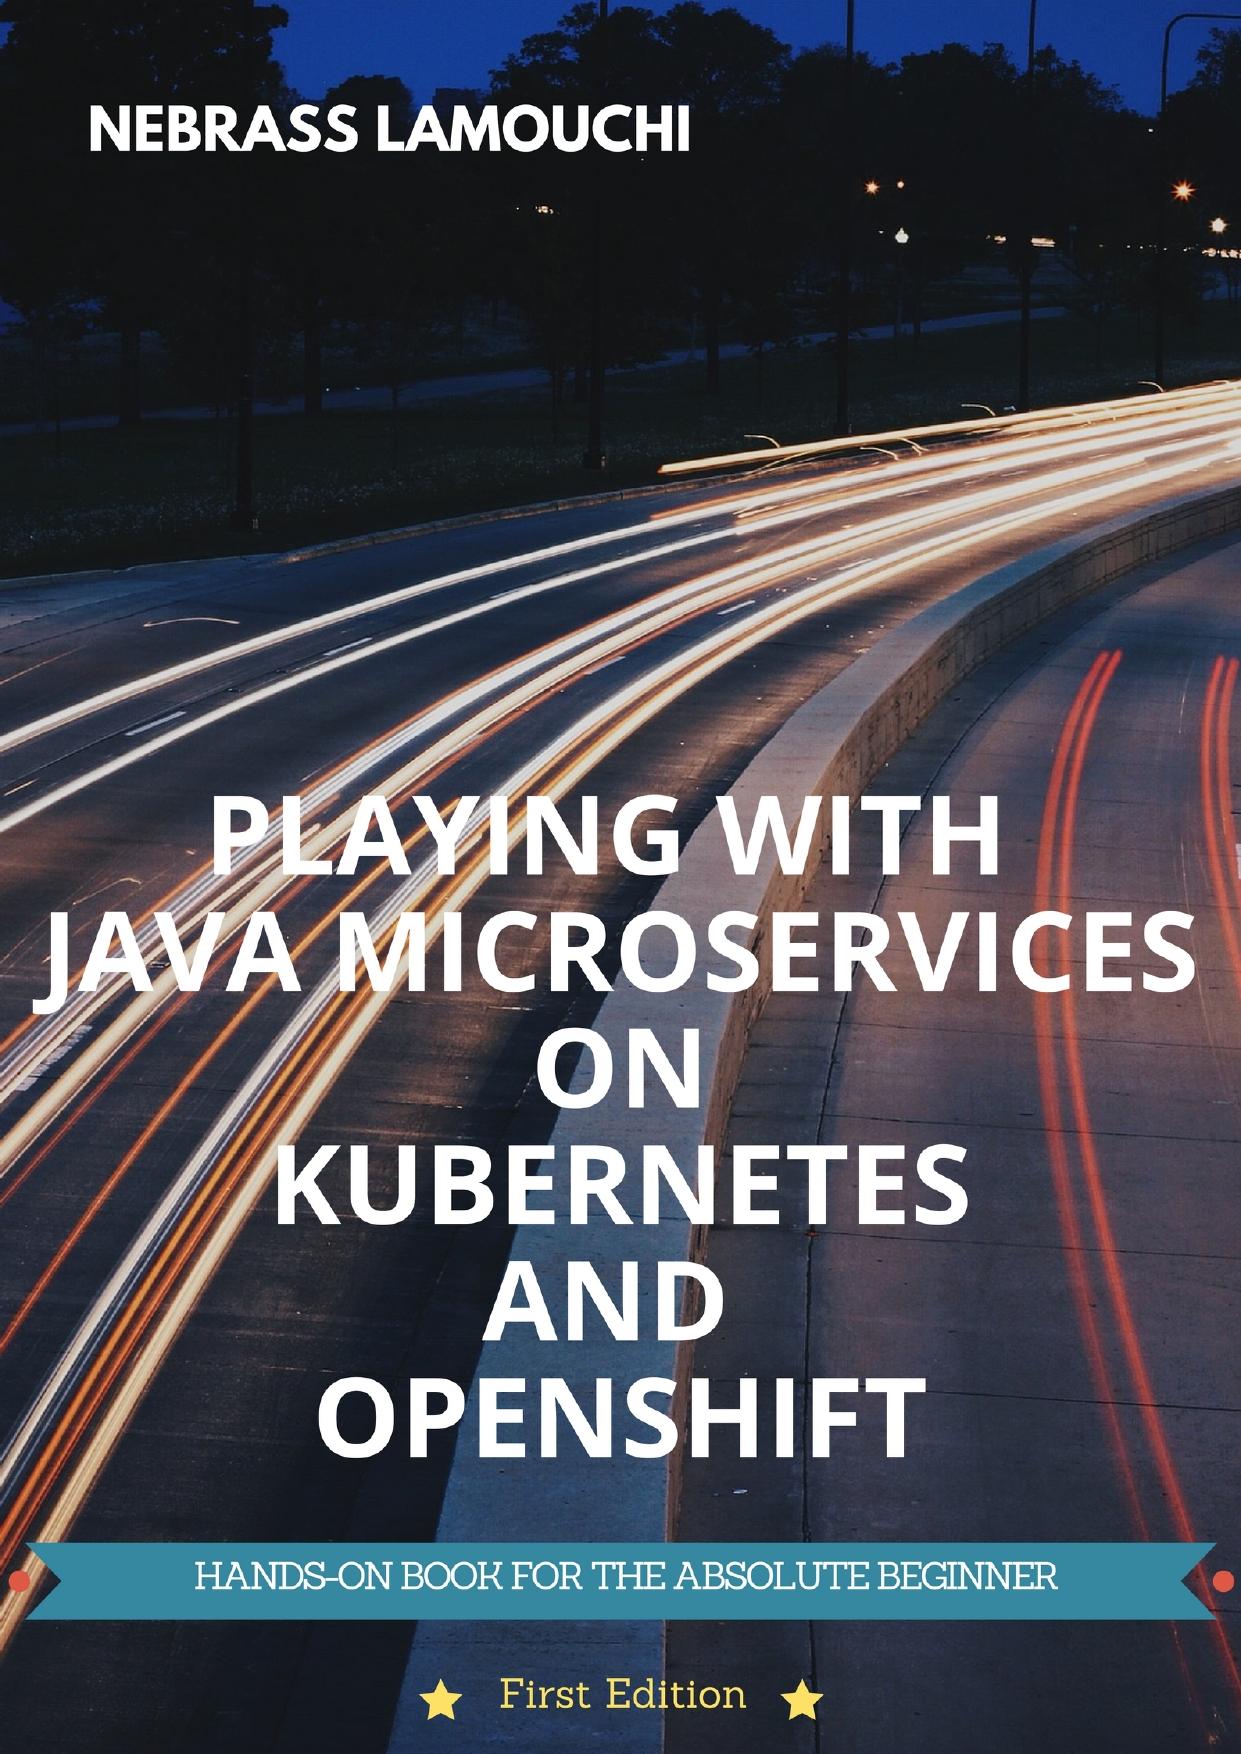 Playing with Java Microservices on Kubernetes and OpenShift by Nebrass Lamouchi